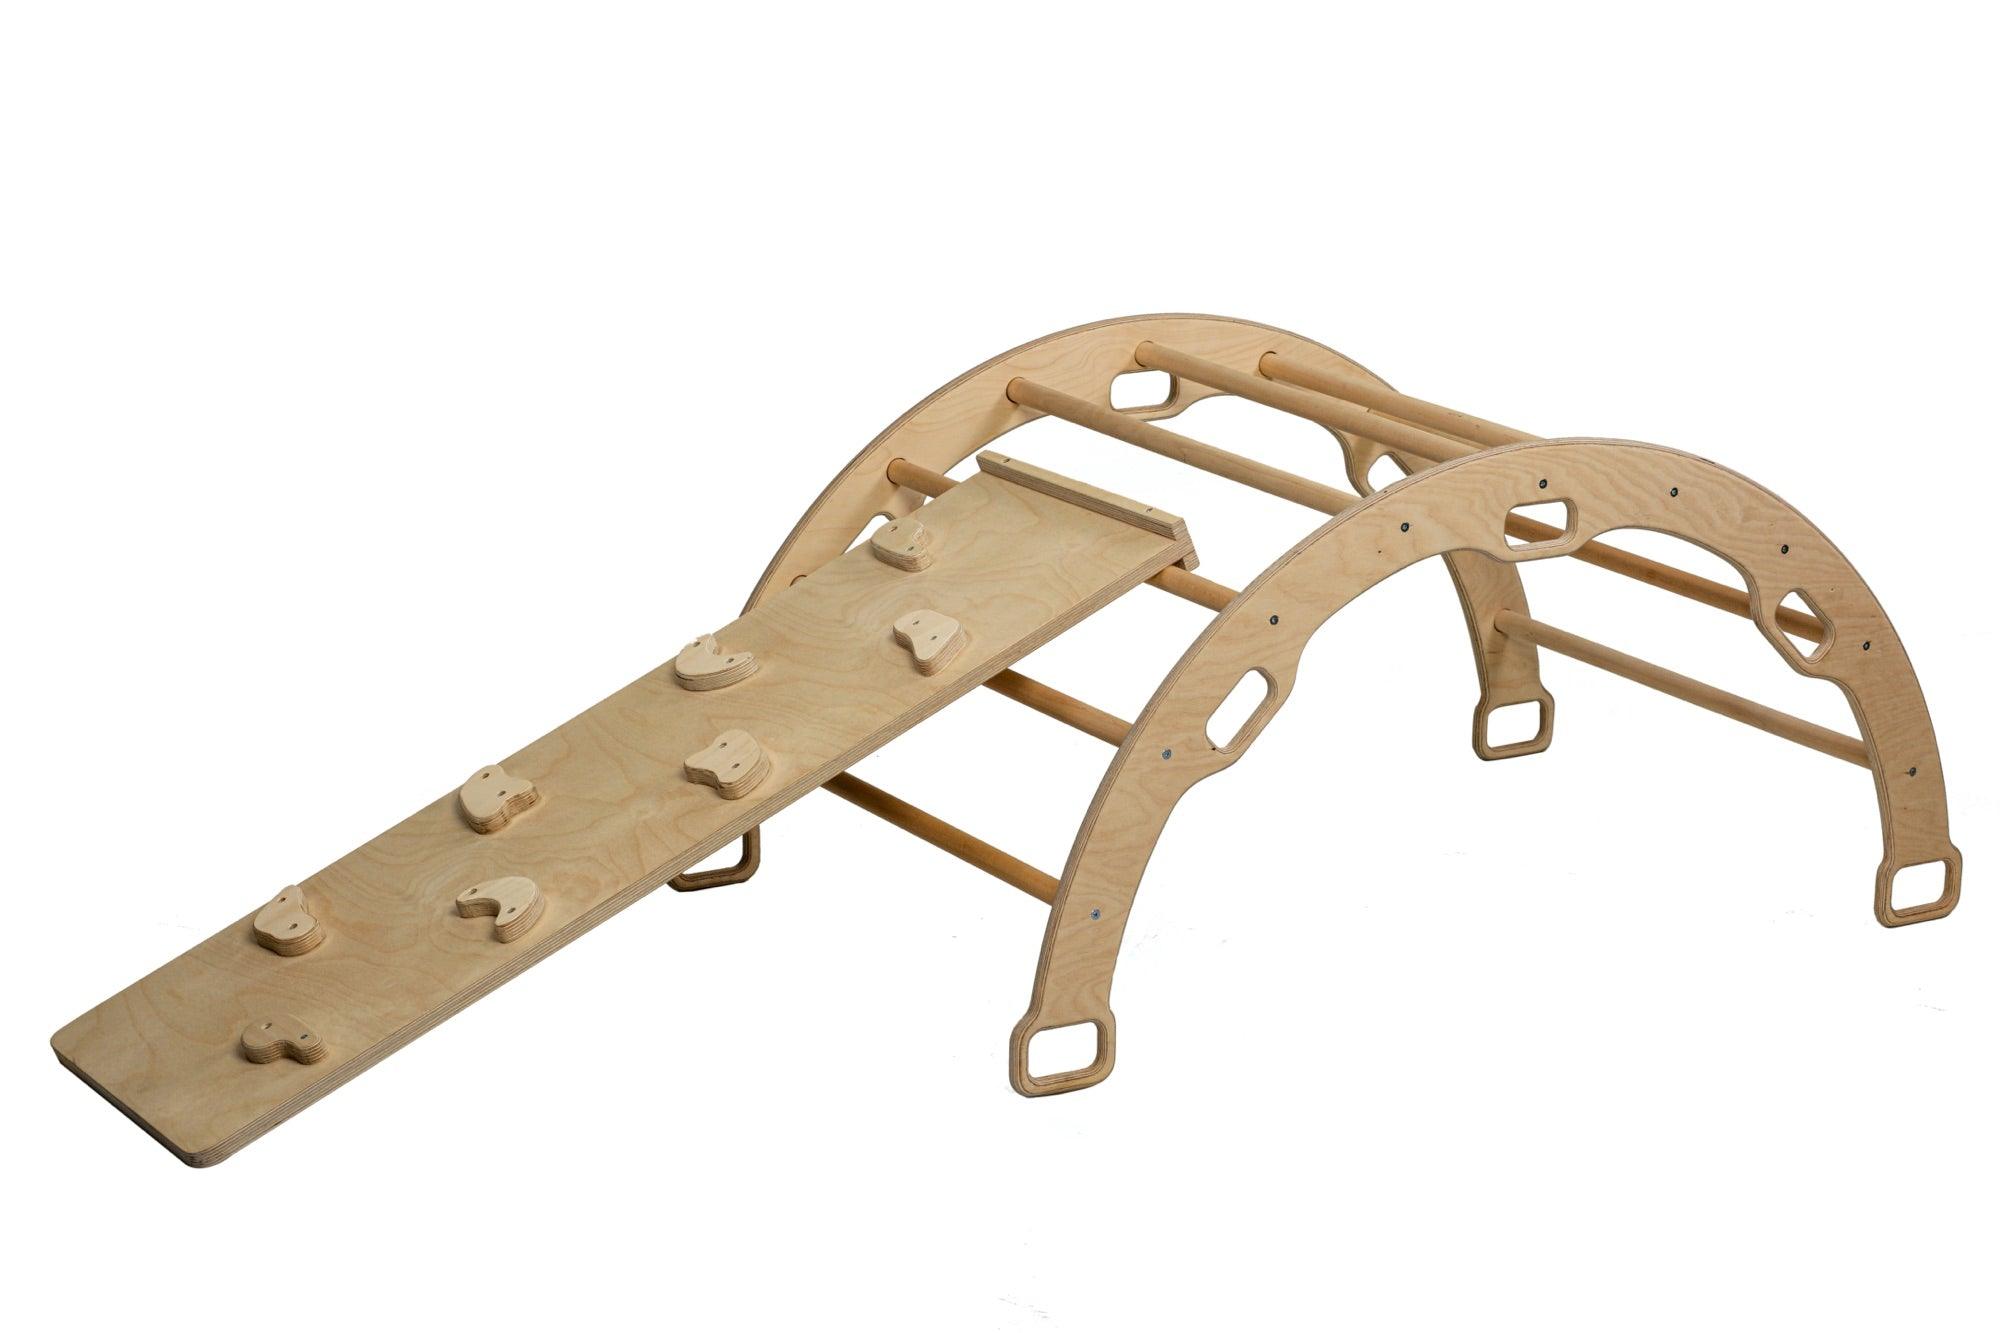 Wooden Climbing Arch Rocker with Ladder Ramp - Learning Through Play